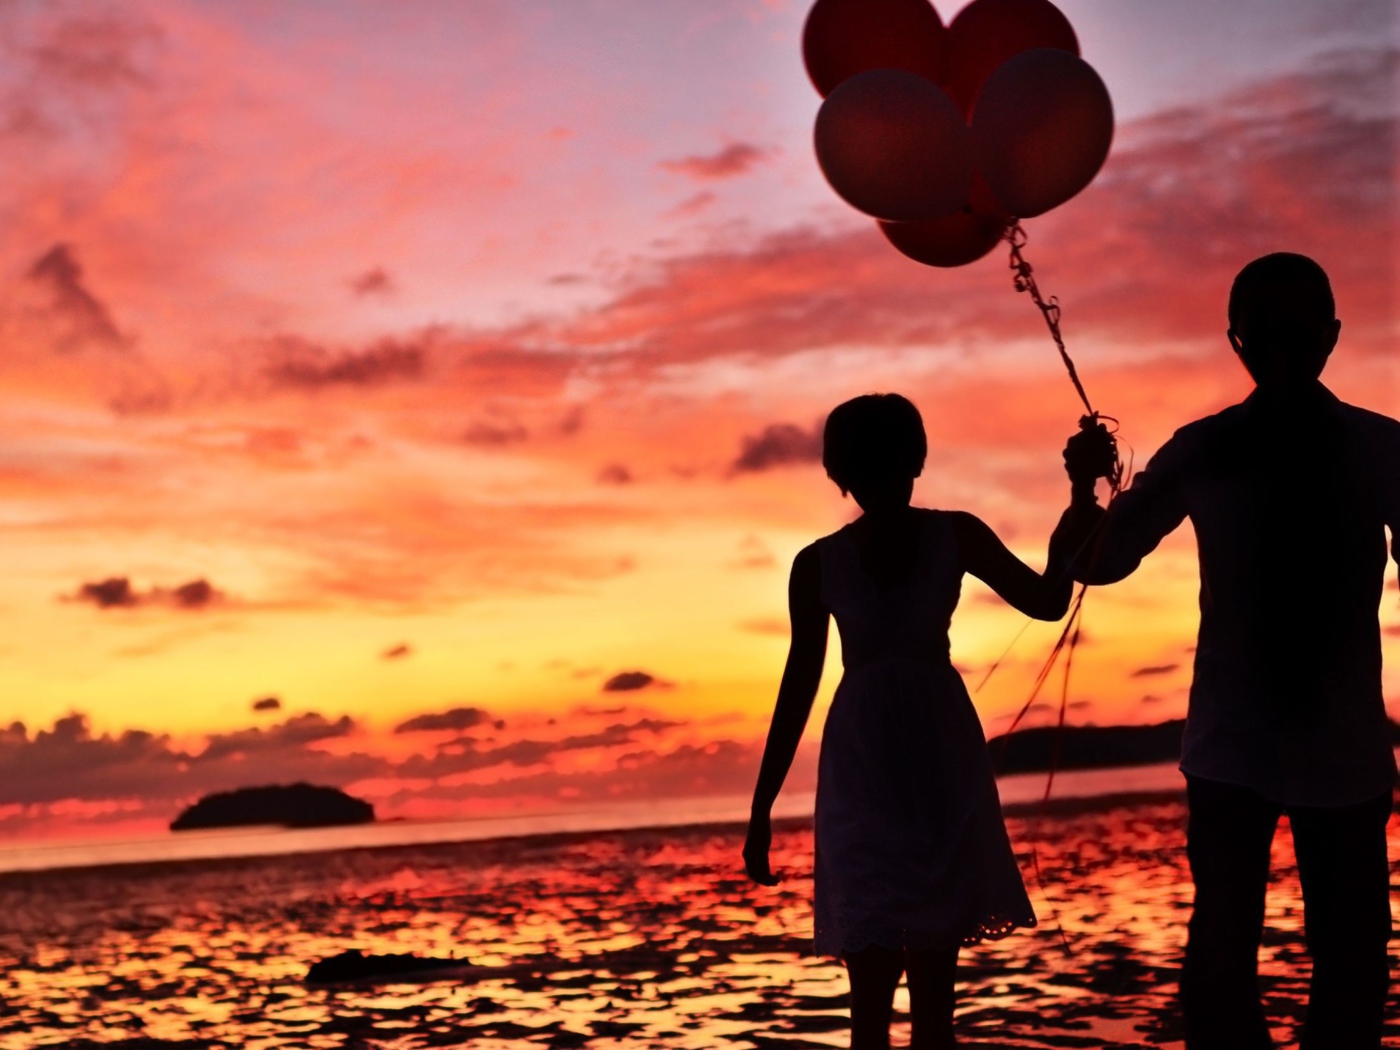 Couple With Balloons Silhouette At Sunset wallpaper 1400x1050